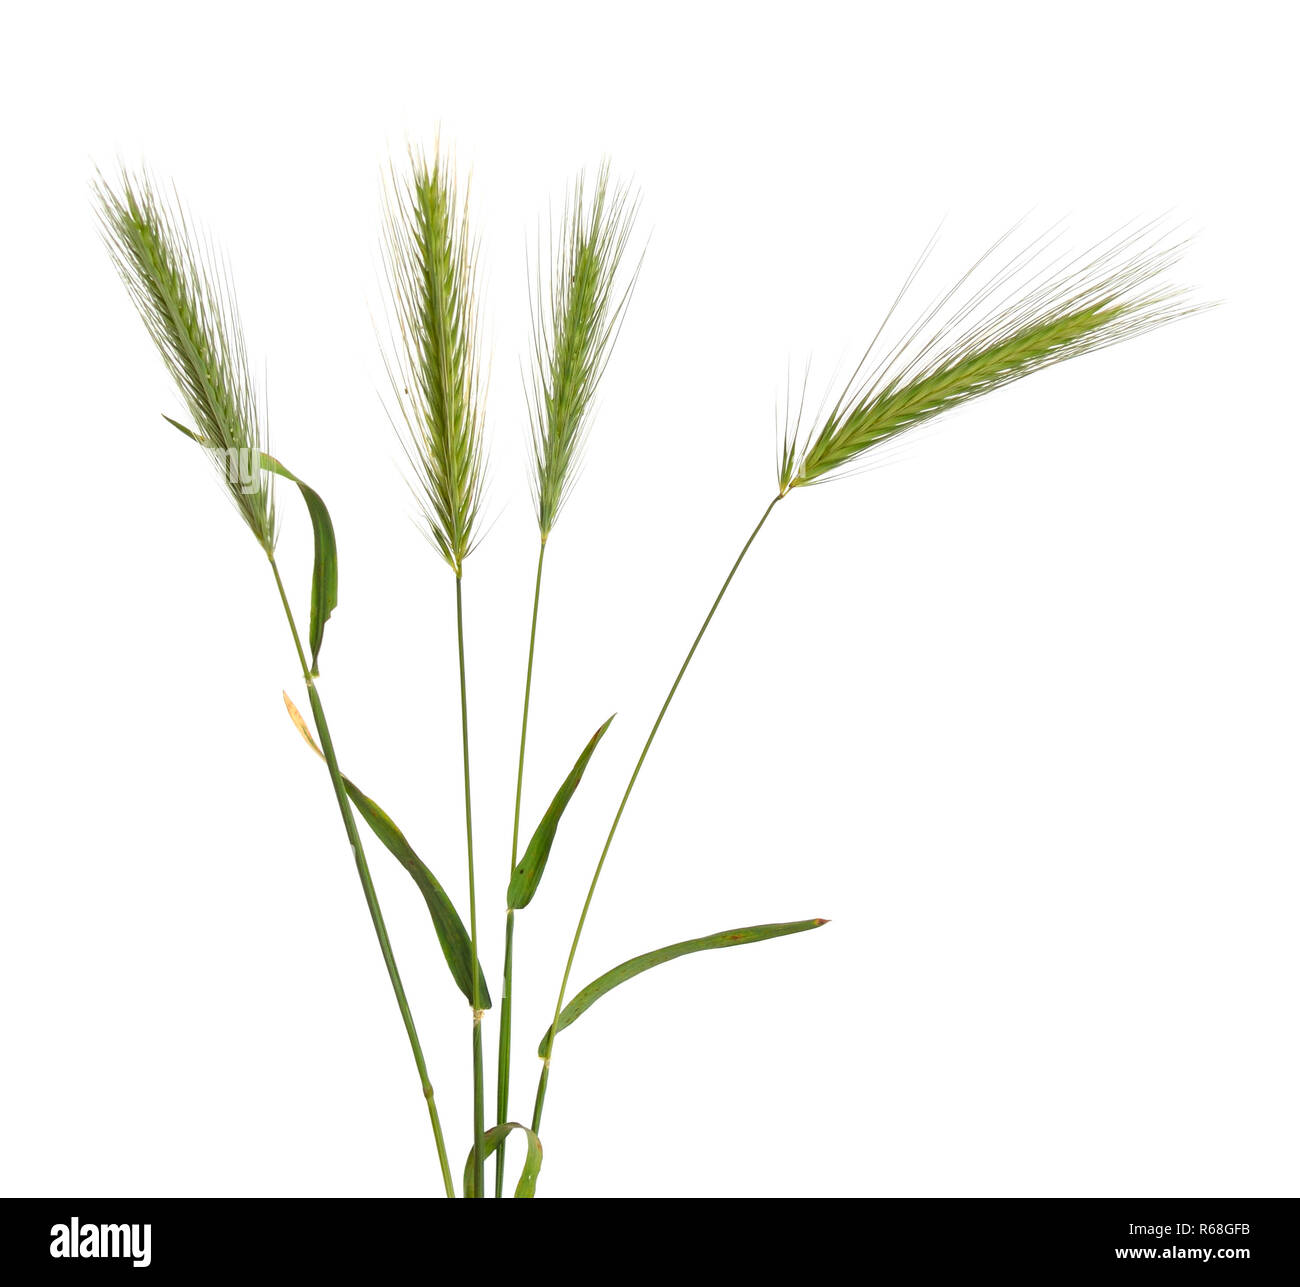 Hordeum murinum, commonly known as wall barley or false barley.  Stock Photo